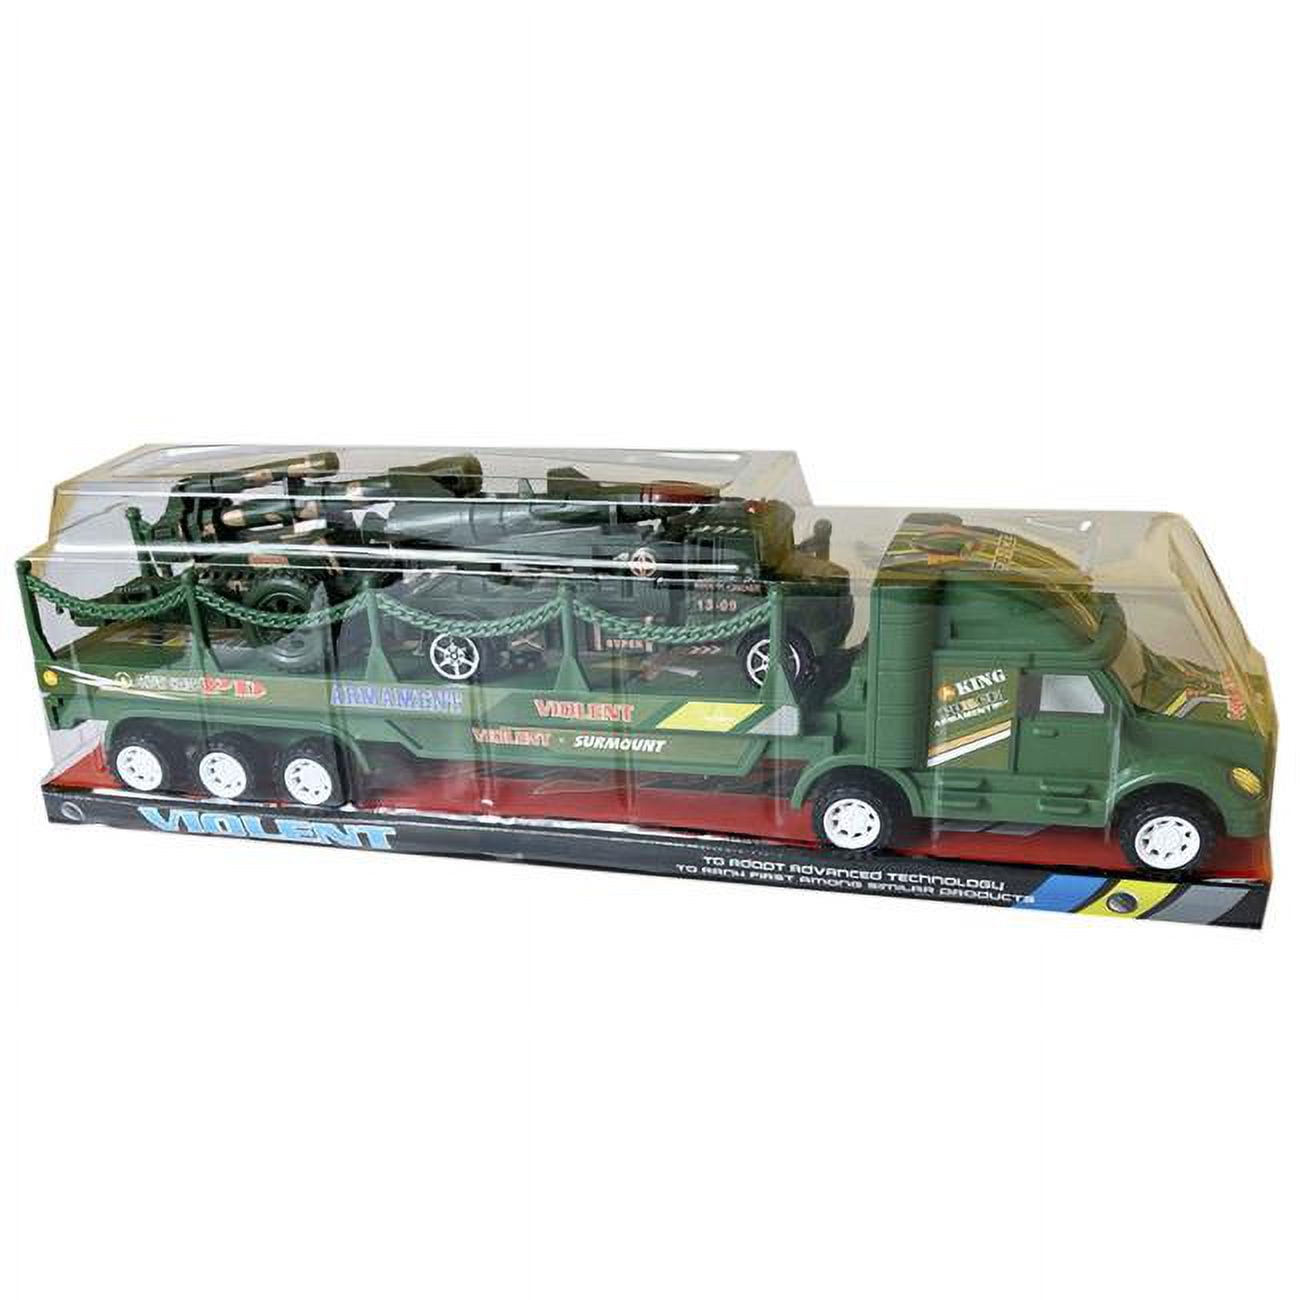 Picture of DDI 2361117 Army Trailer Friction Vehicle Toy - Case of 8